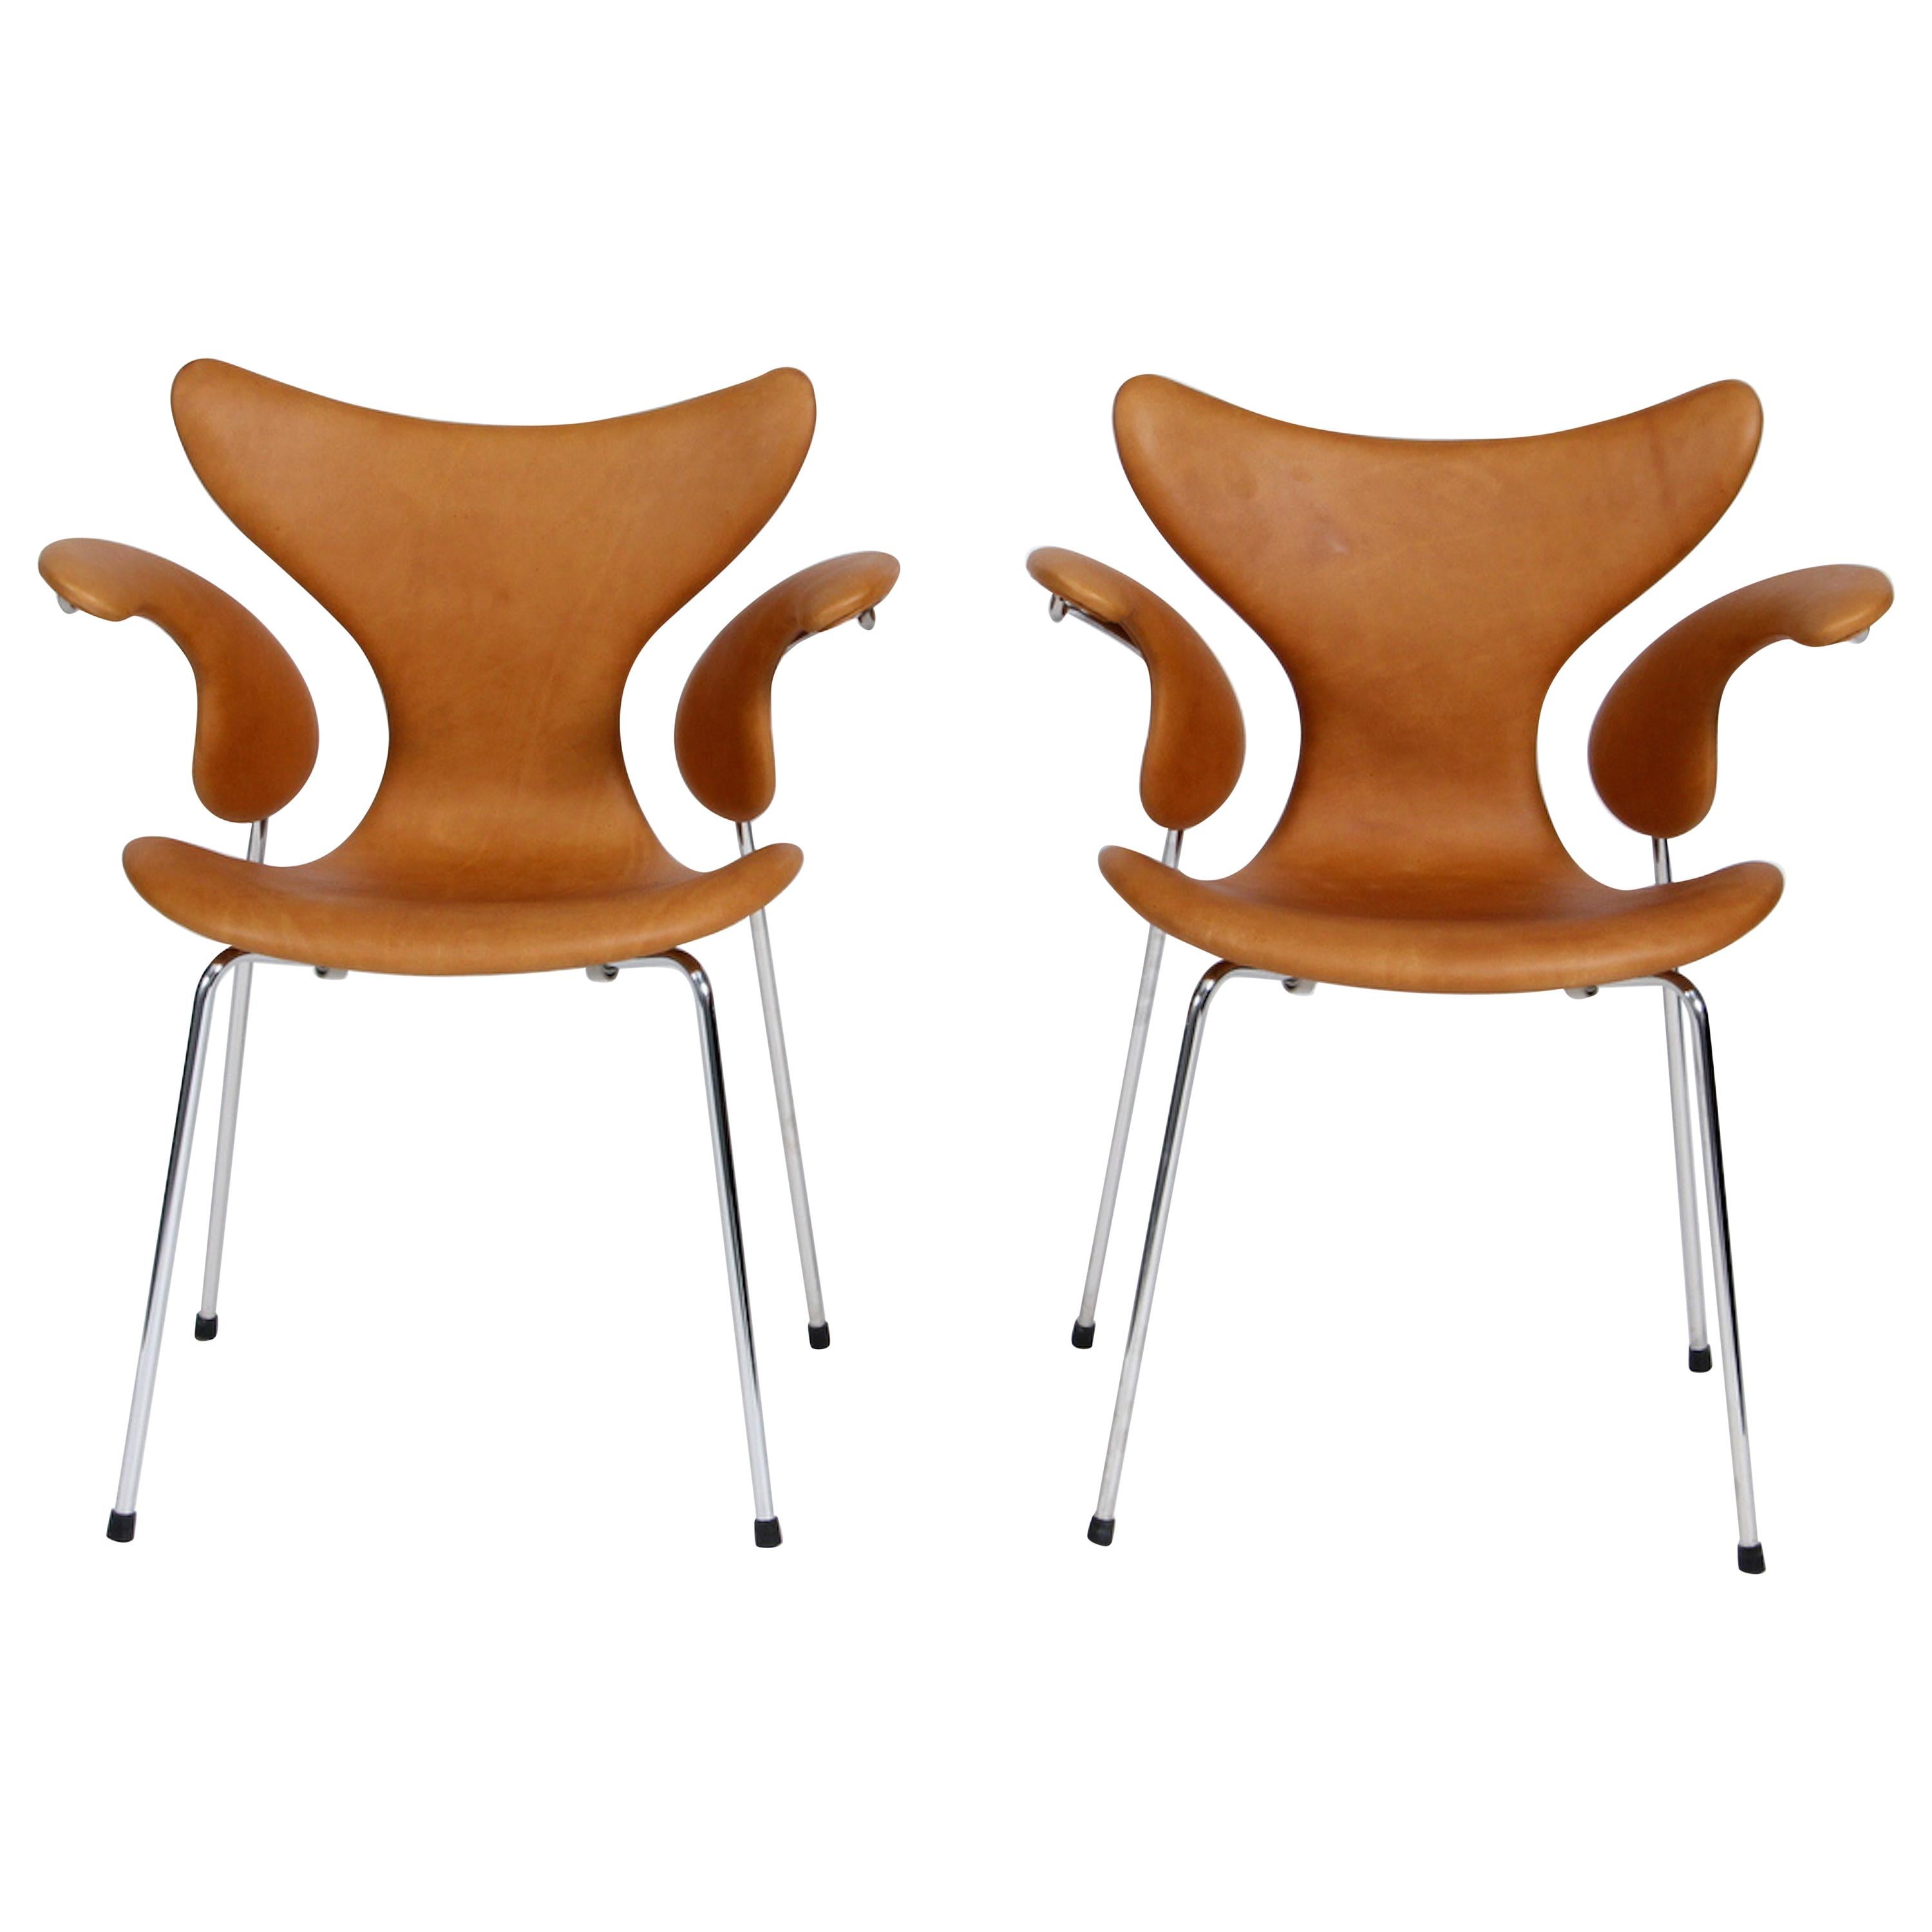 One Arne Jacobsen Brown Leather Seagull Chair For Sale